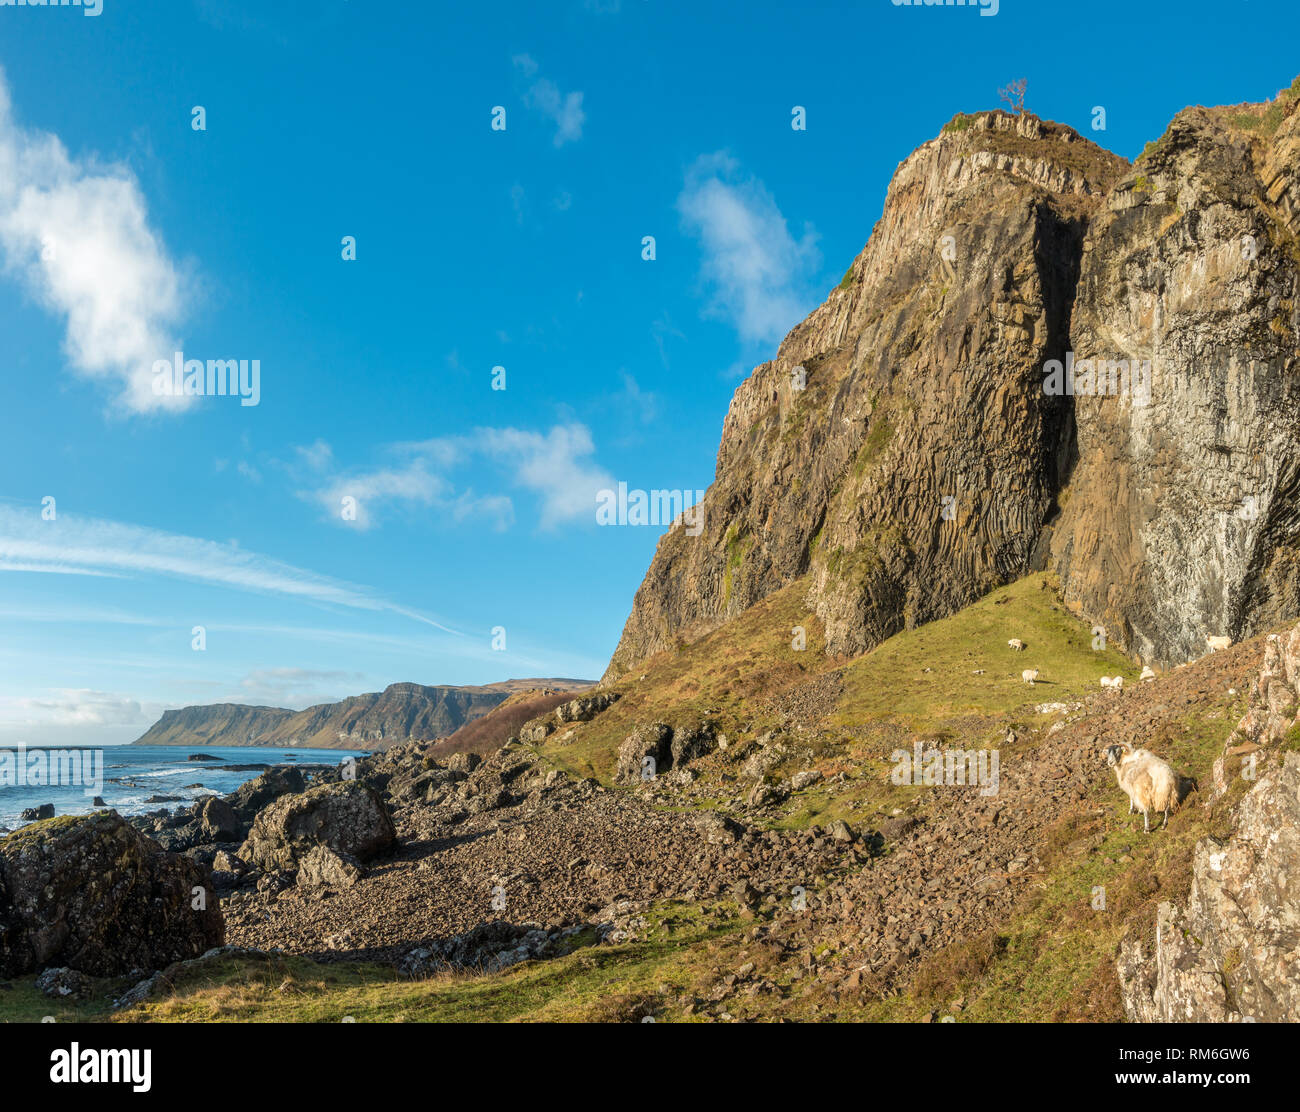 Stunning landscape view of the Carsaig cliffs and basalt columns on the Isle of Mull on a beautiful winter's day, Scotland Stock Photo